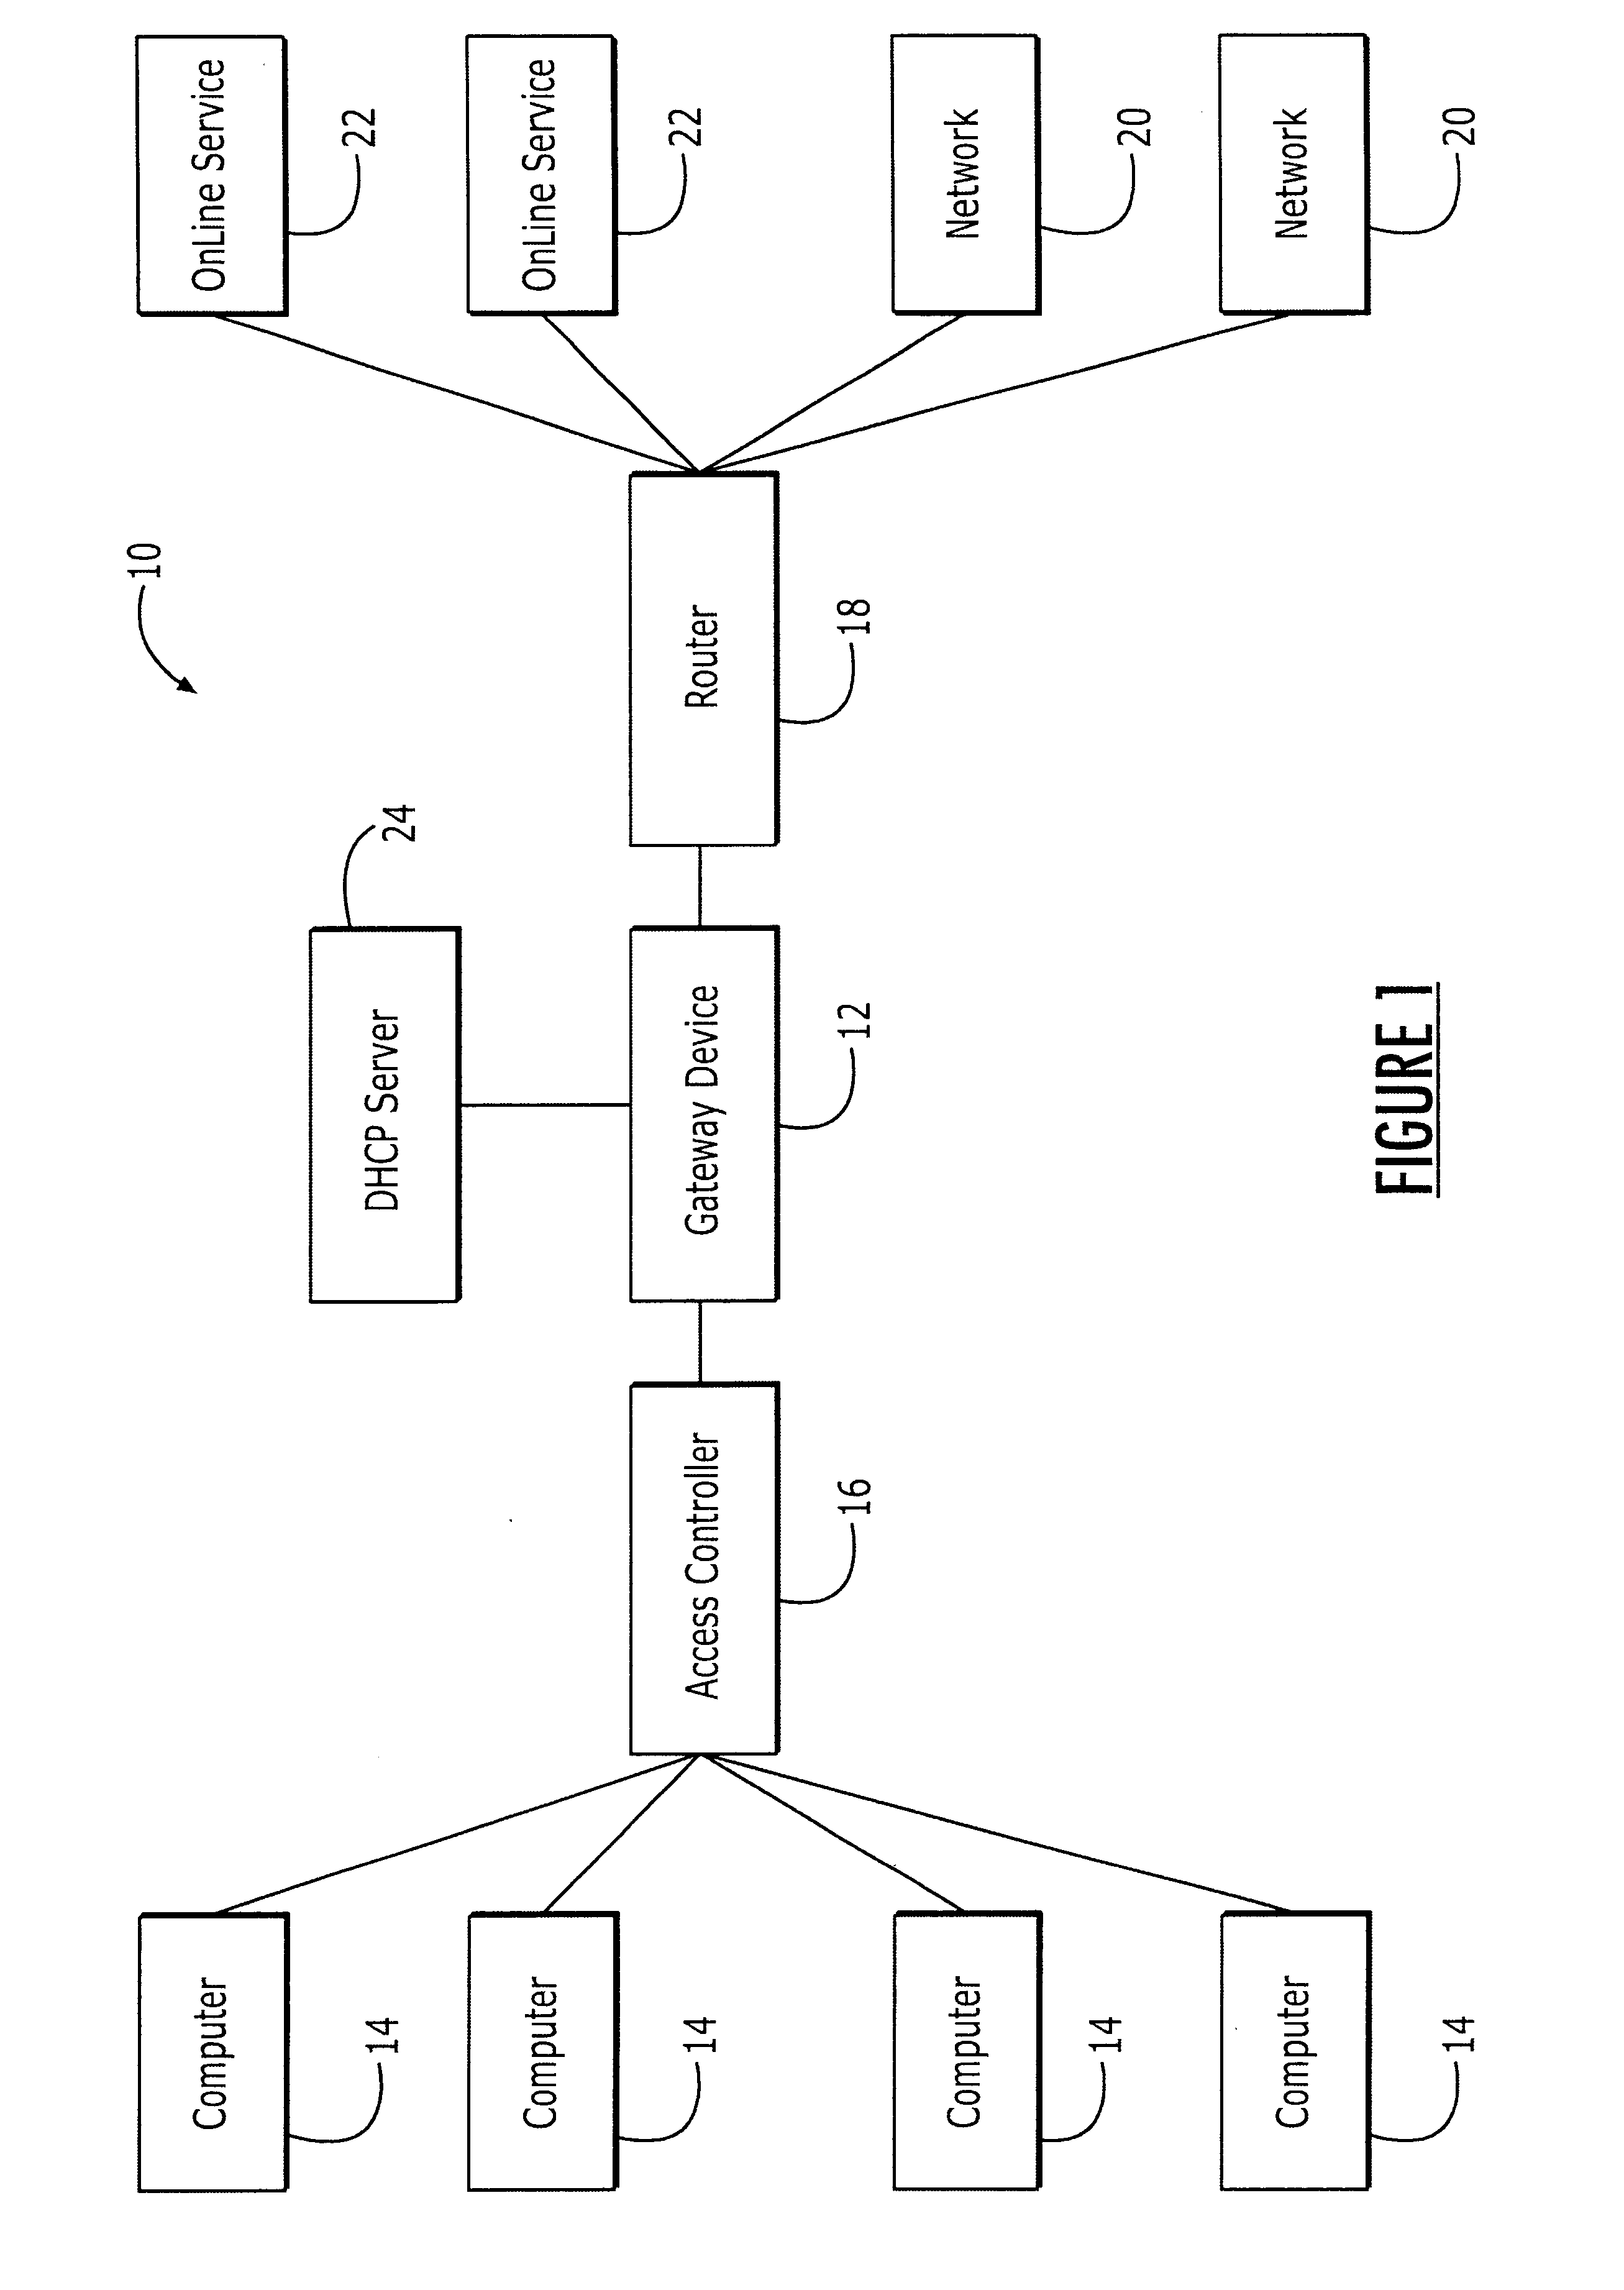 Systems and methods for integrating a network gateway device with management systems